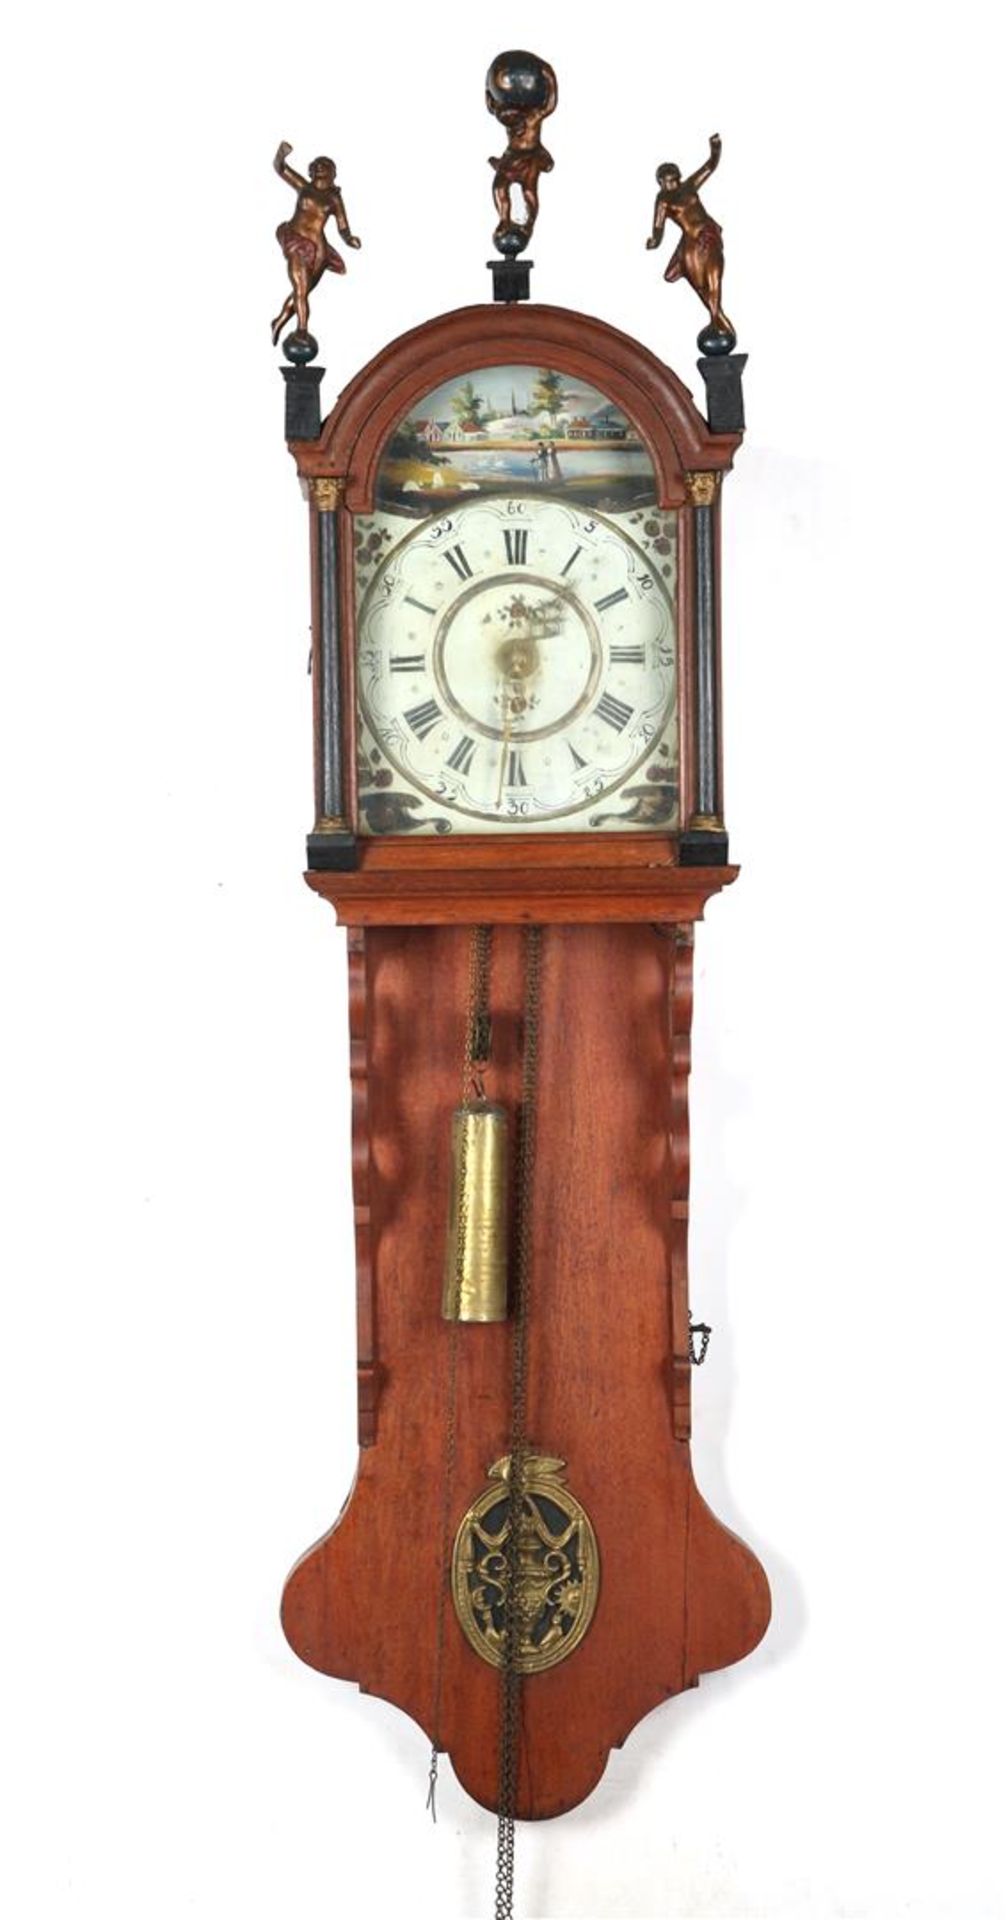 Frisian tail clock in oak case with painted dial, incomplete, fixer-upper